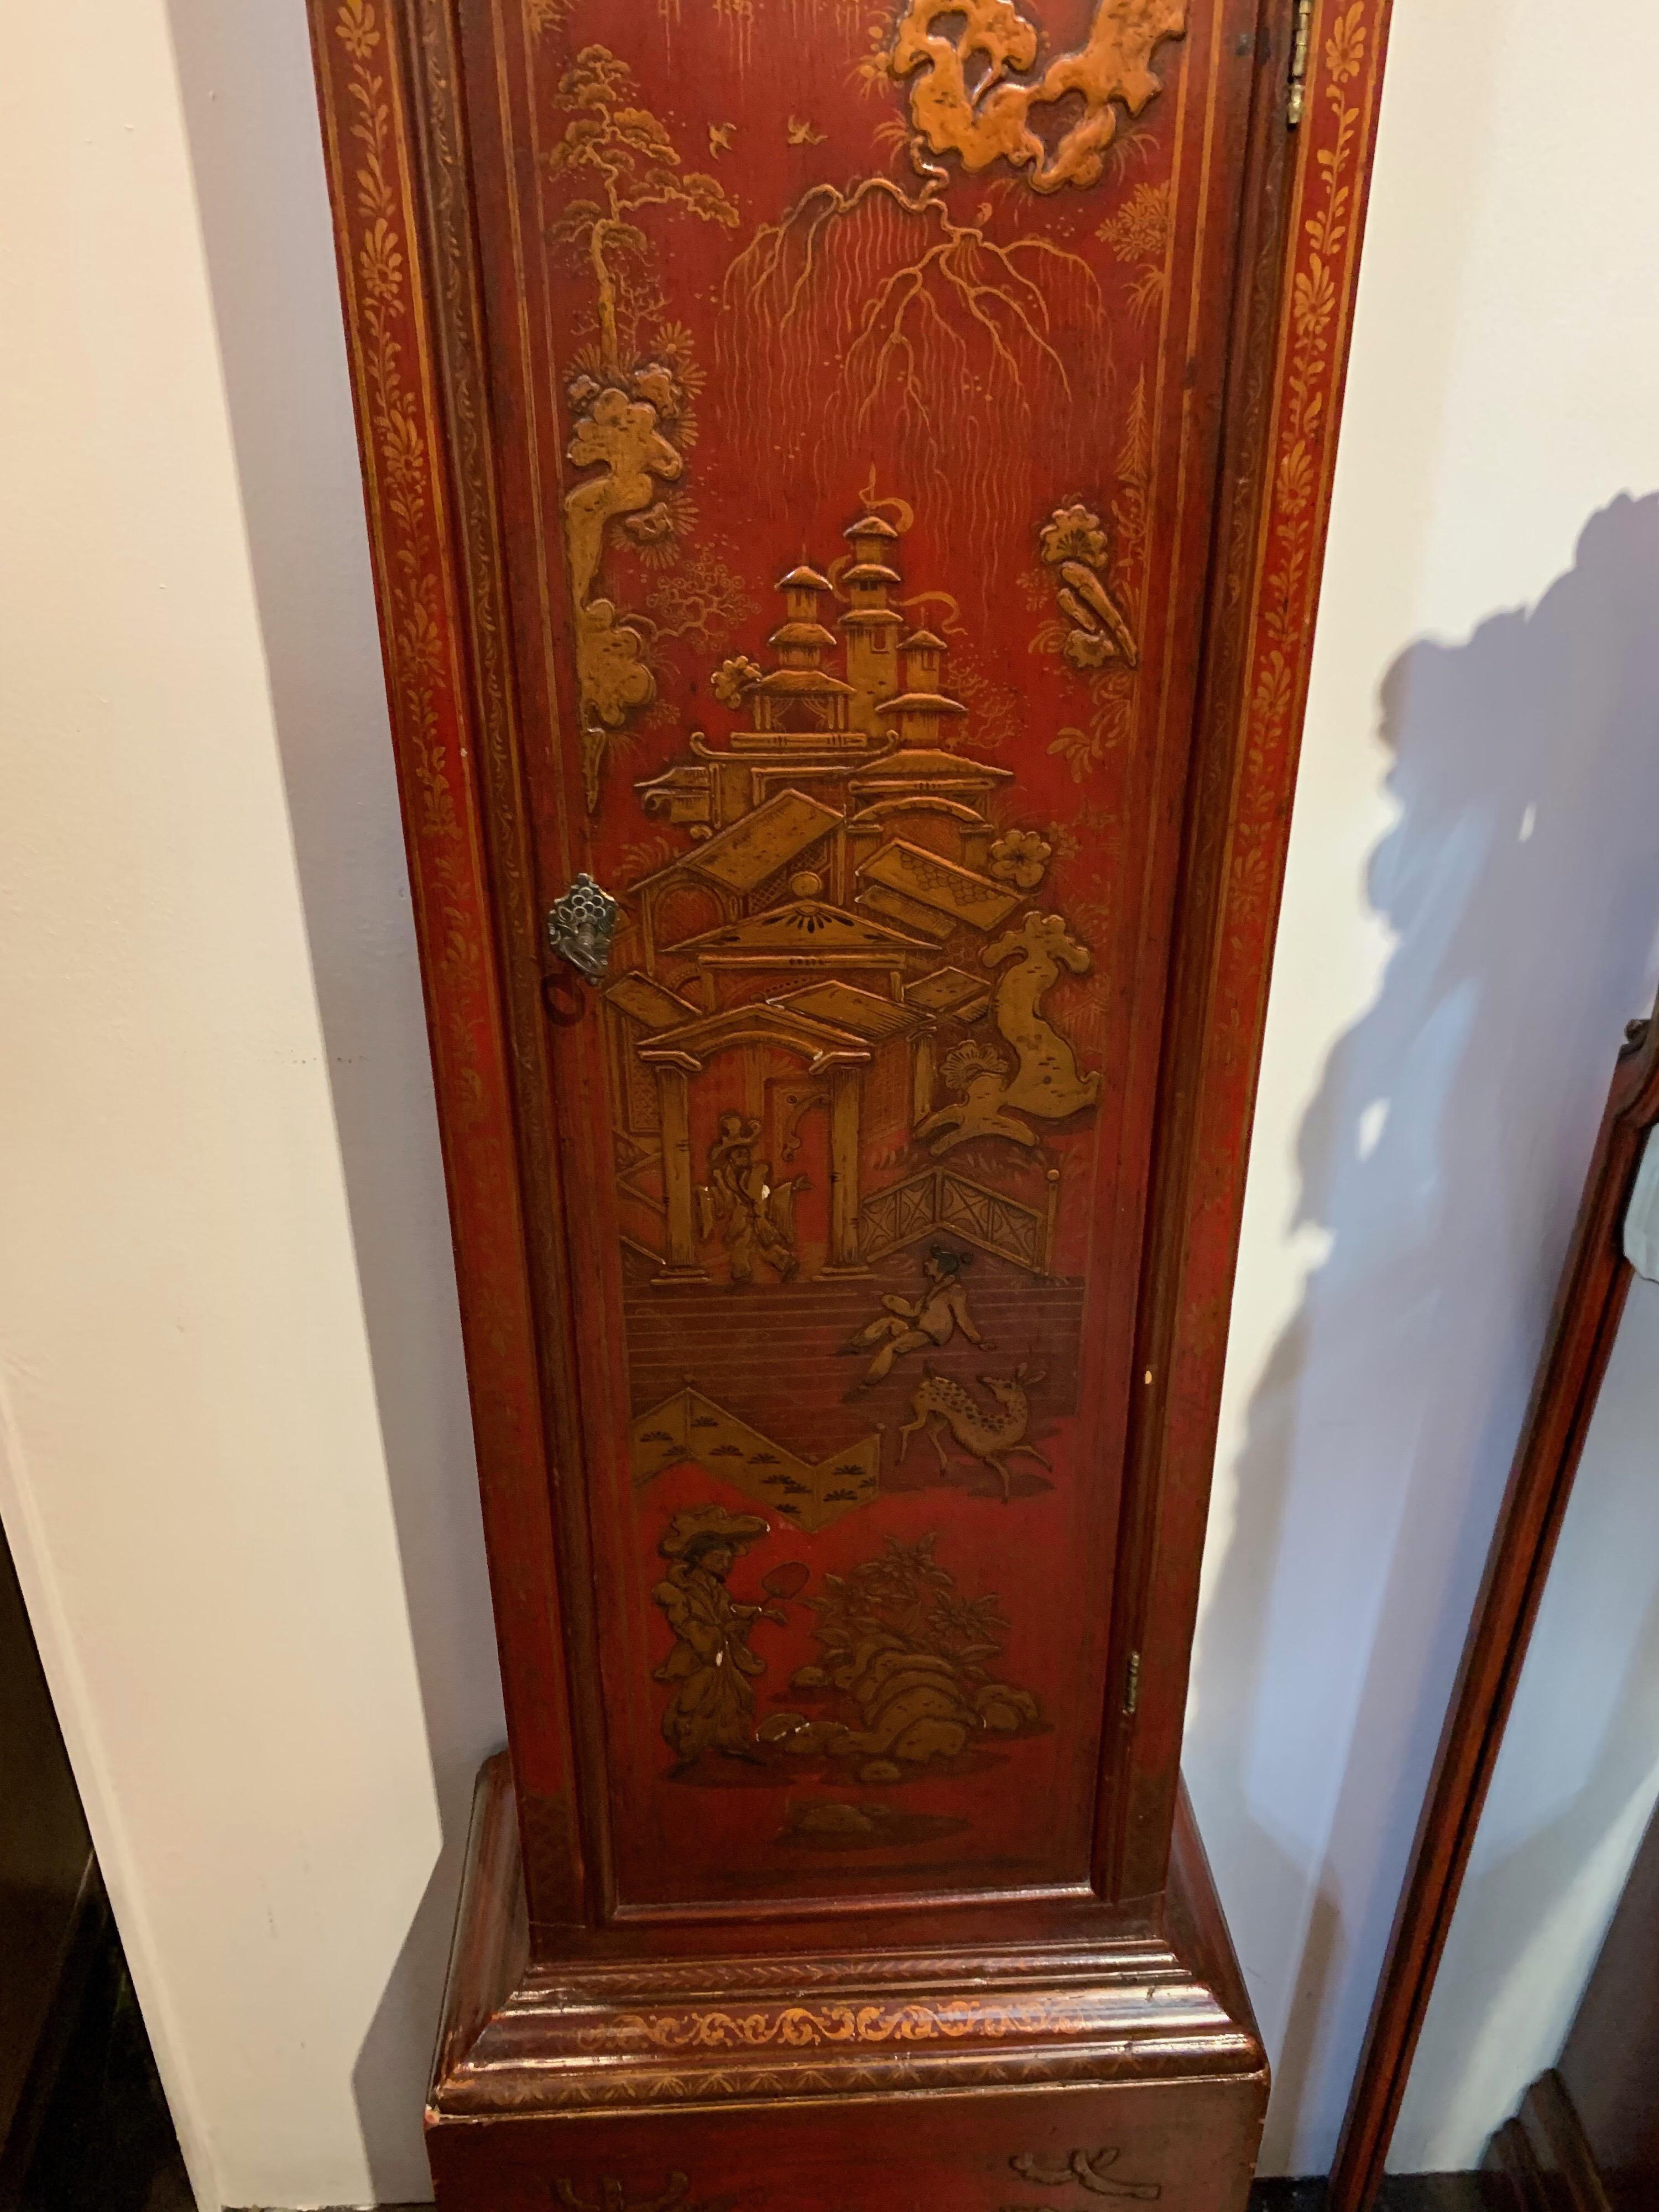 Beautiful 19th century red lacquered tall cased clock with chinoiserie design. The clock has London movement by George Tyler. A stunning piece!